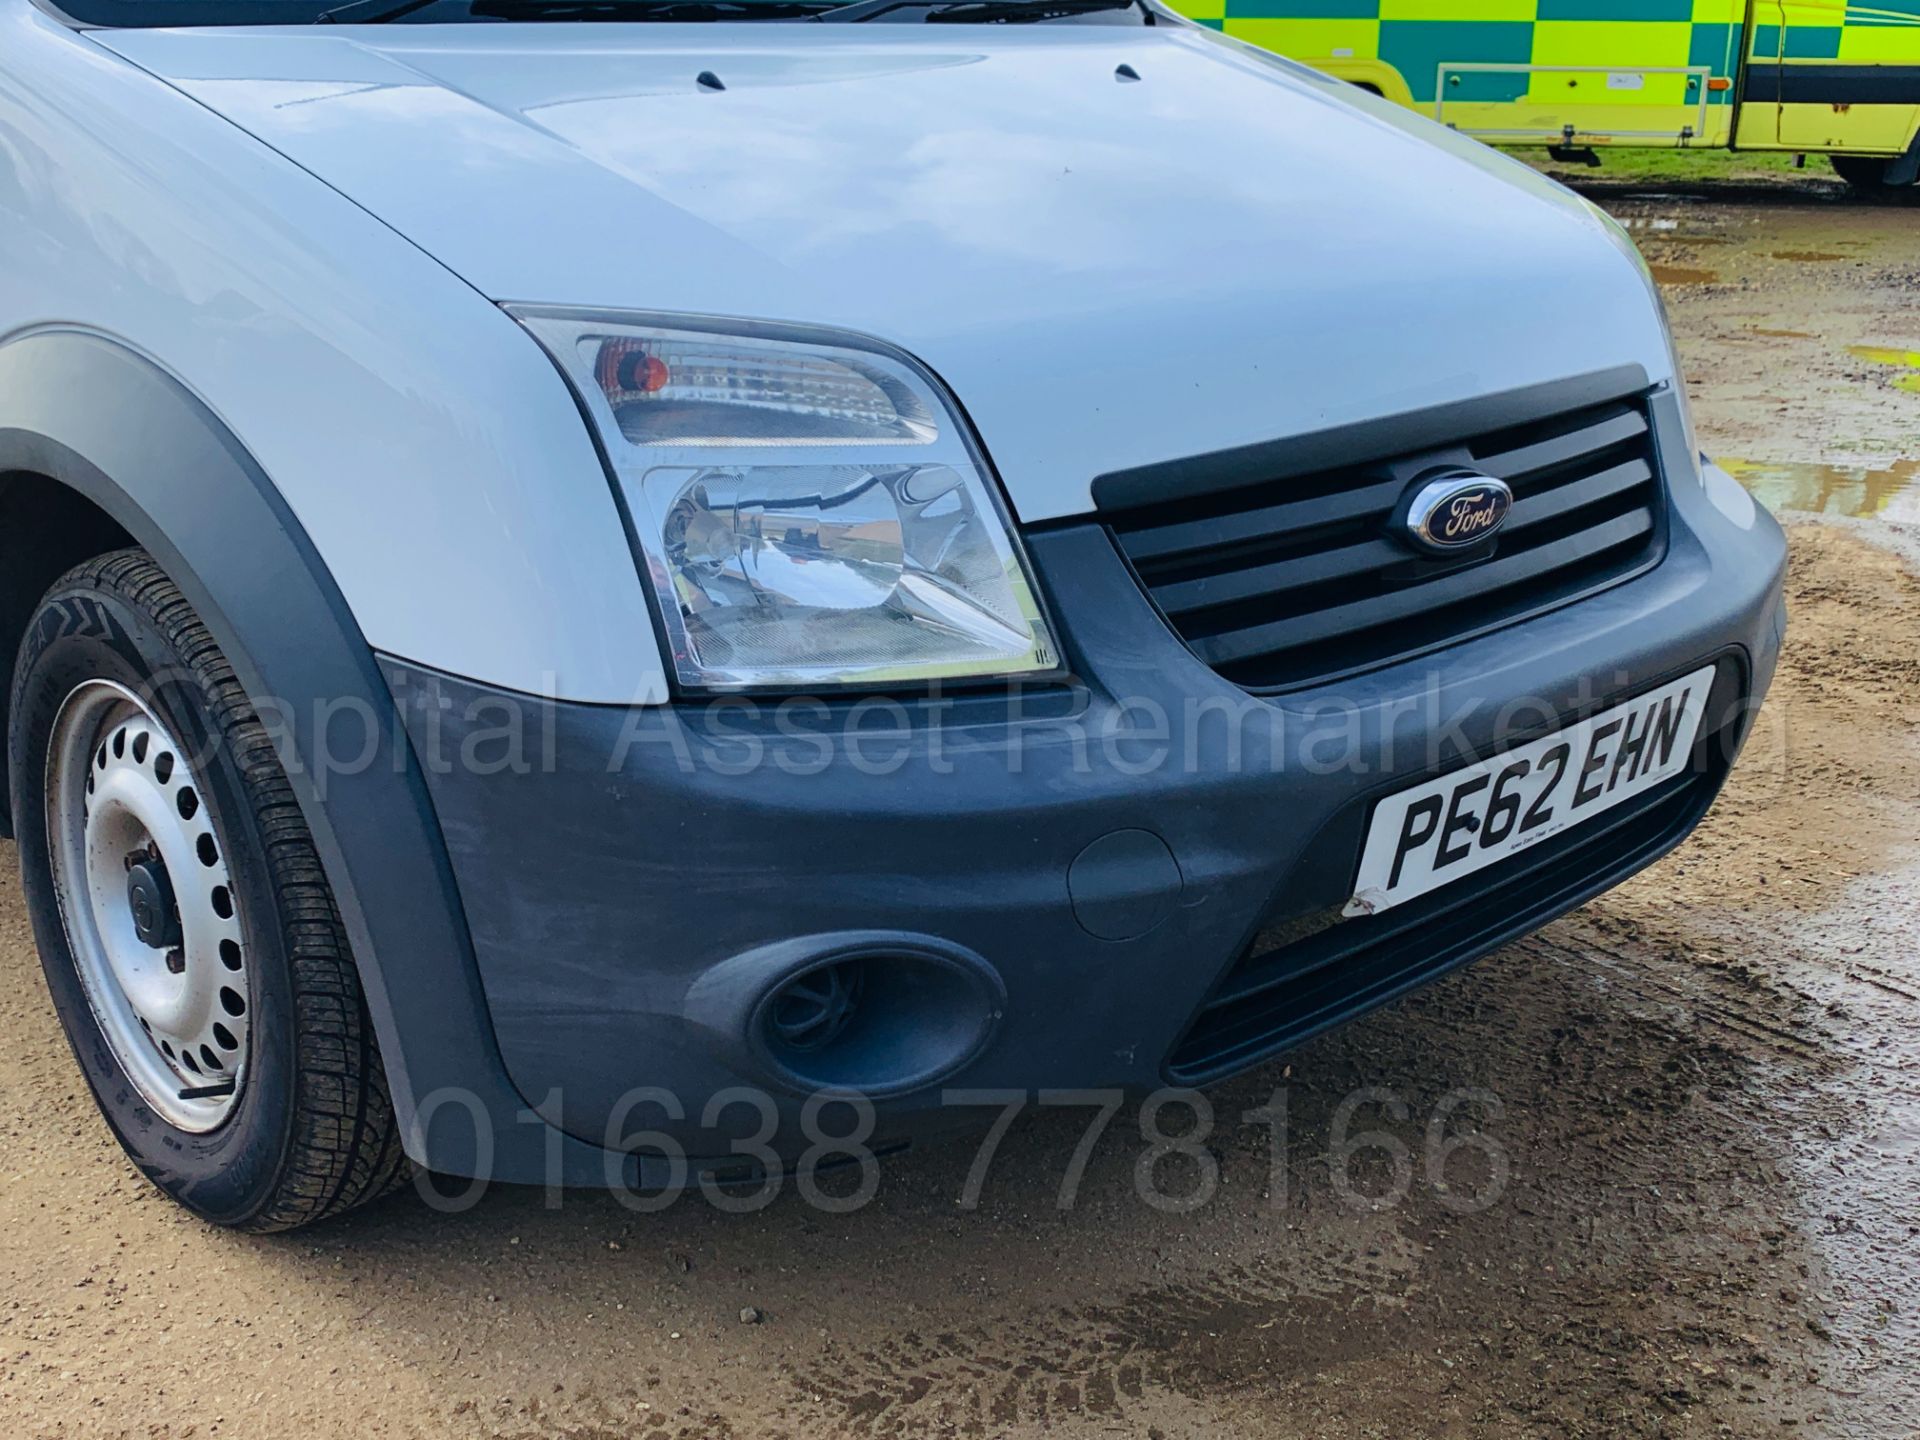 ON SALE FORD TRANSIT CONNECT T200 *LCV - PANEL VAN* (2013 MODEL) '1.8 TDCI -*LOW MILES - Image 13 of 30